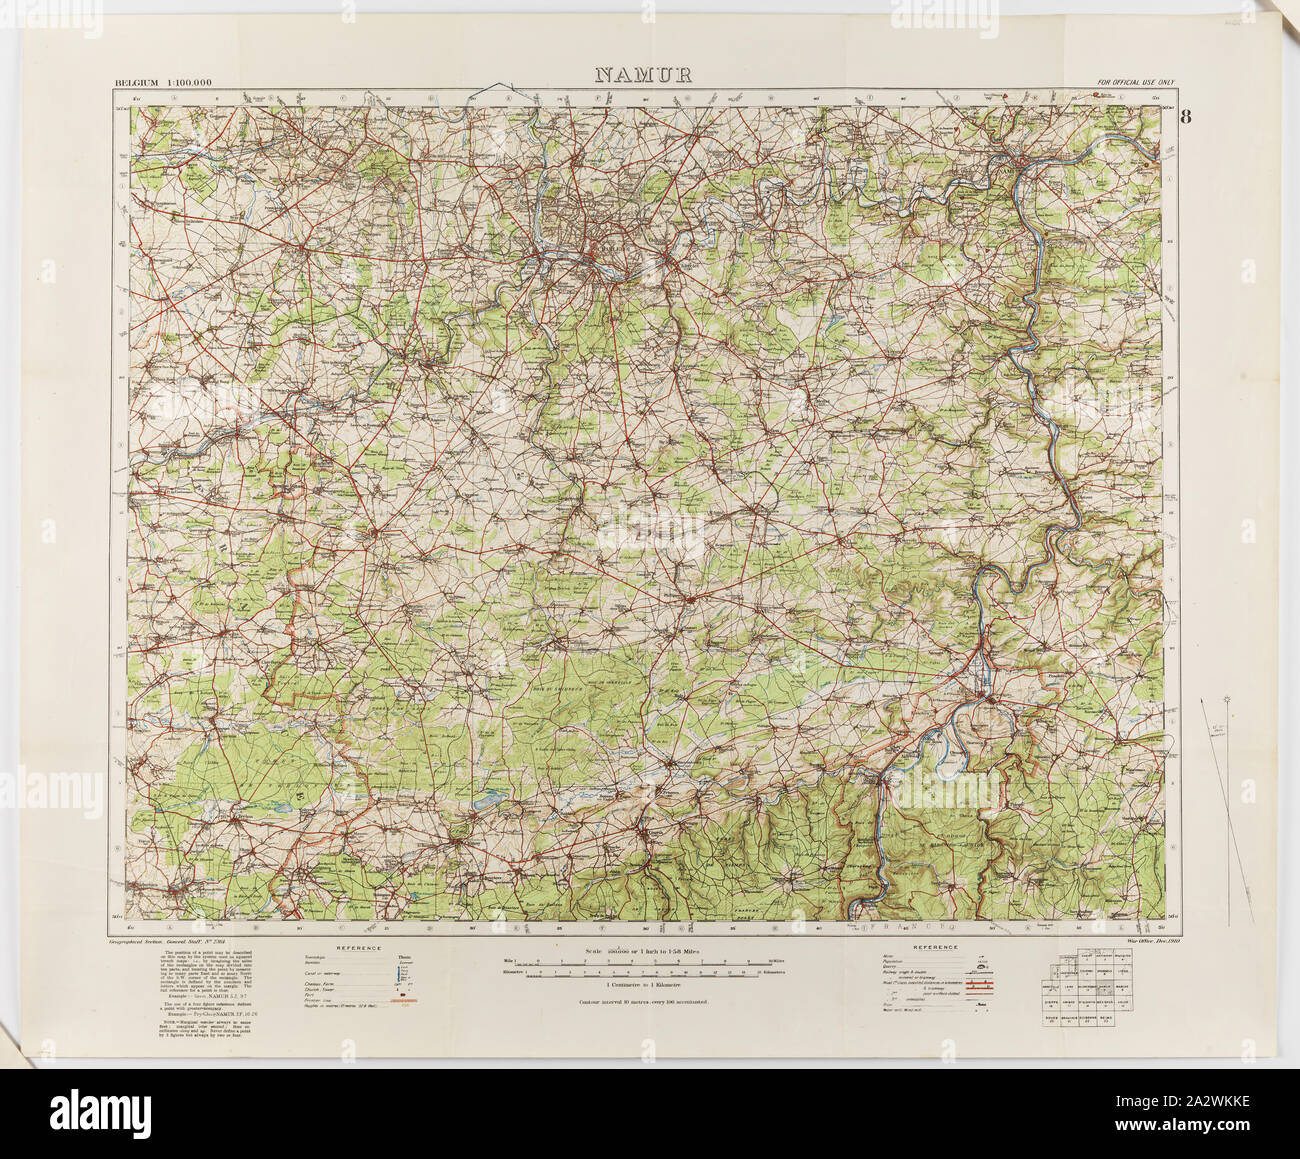 Map - Military, Belgium, Namur 8, General Staff no. 2364, Scale 1:100,000, World War I, 1910, Military map of Belgium, Namur area (a hand-written inscription identifies it as Namur 8 district), scale 1:100,000, published in 1910. The map is labelled General Staff No. 2364. It would have been used during World War I. Maps of this scale lacked the detail needed for trench warfare, instead providing an overview of regions for the use of senior commanders. Part of the collection of World Stock Photo